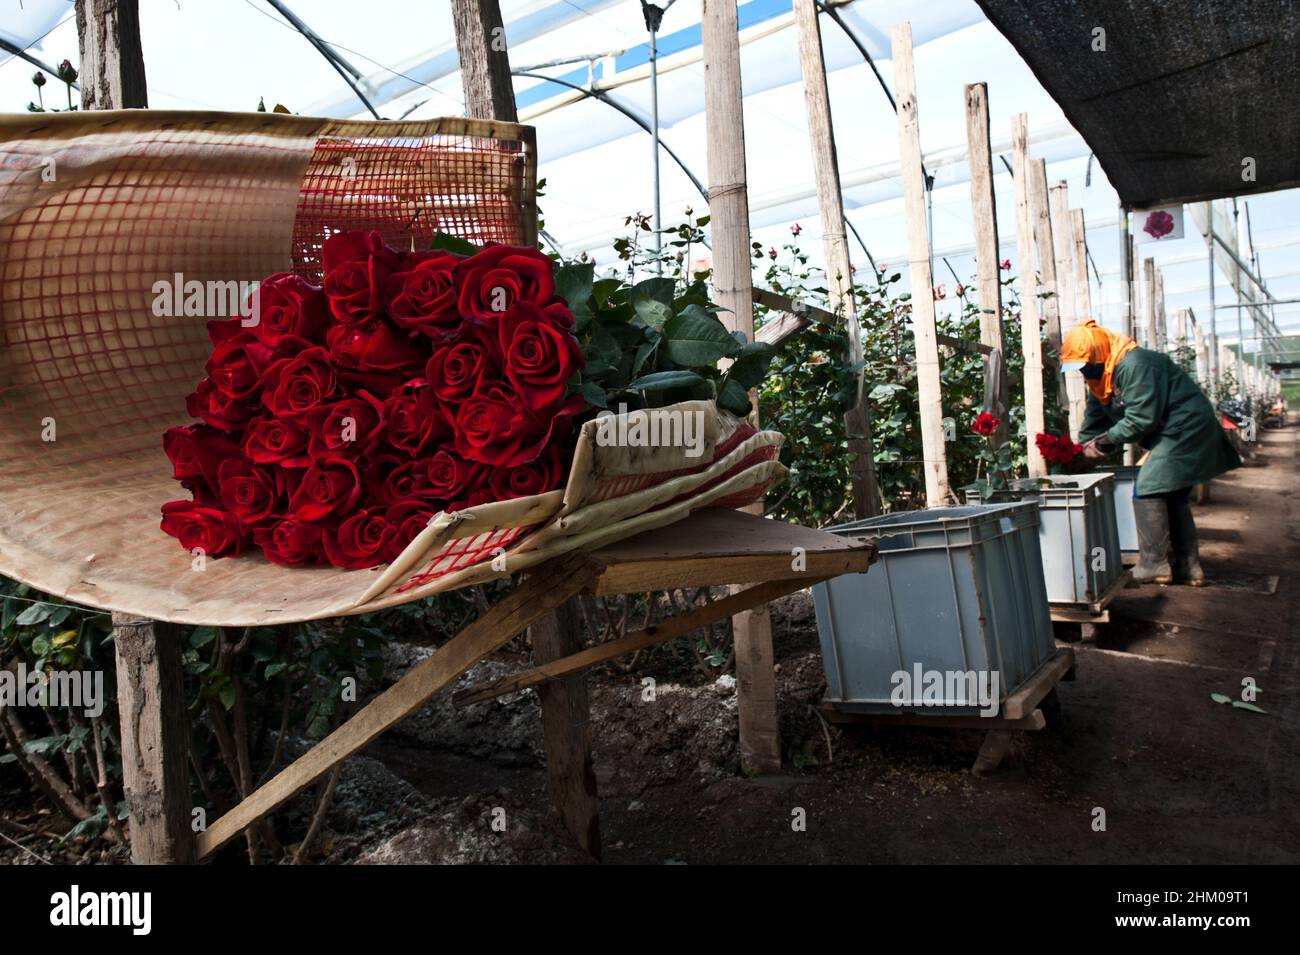 Santa Rosa, Cayambe  Ecuador - December 8, 2010: Plantation workers pack roses during the harvest period Stock Photo